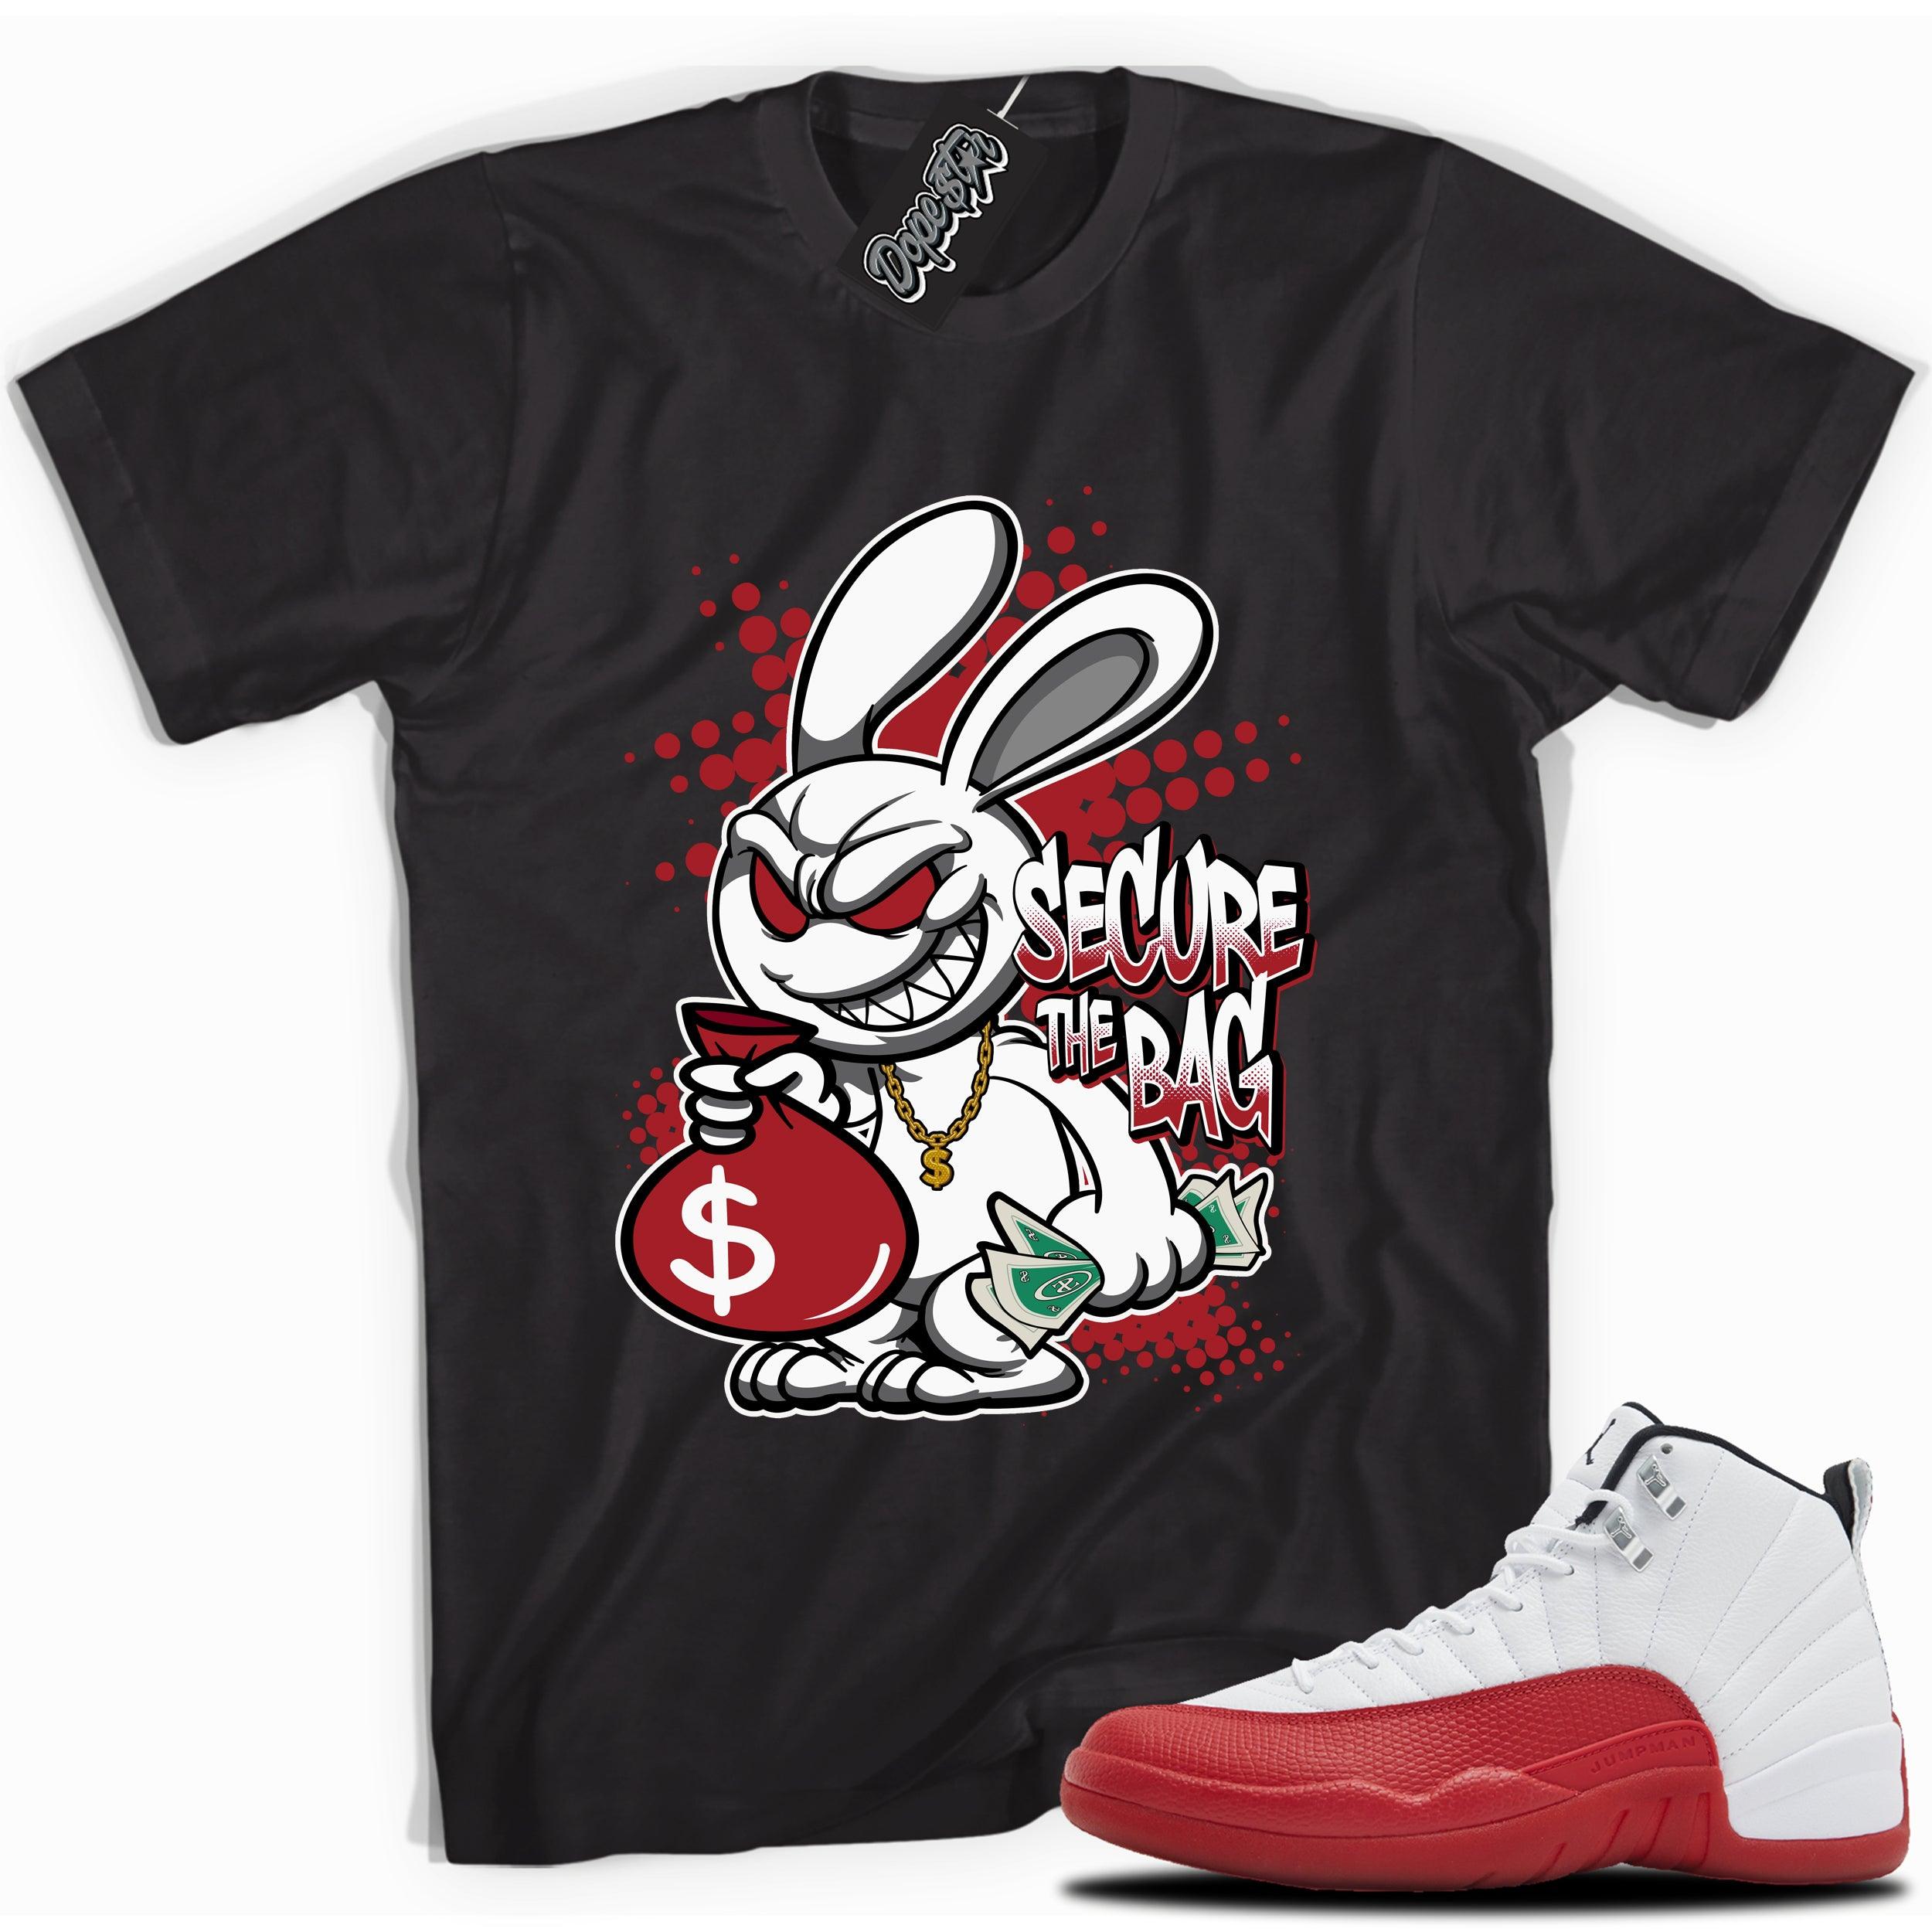 Cool Black graphic tee with “SECURE THE BAG” print, that perfectly matches Air Jordan 12 Retro Cherry Red 2023 red and white sneakers 